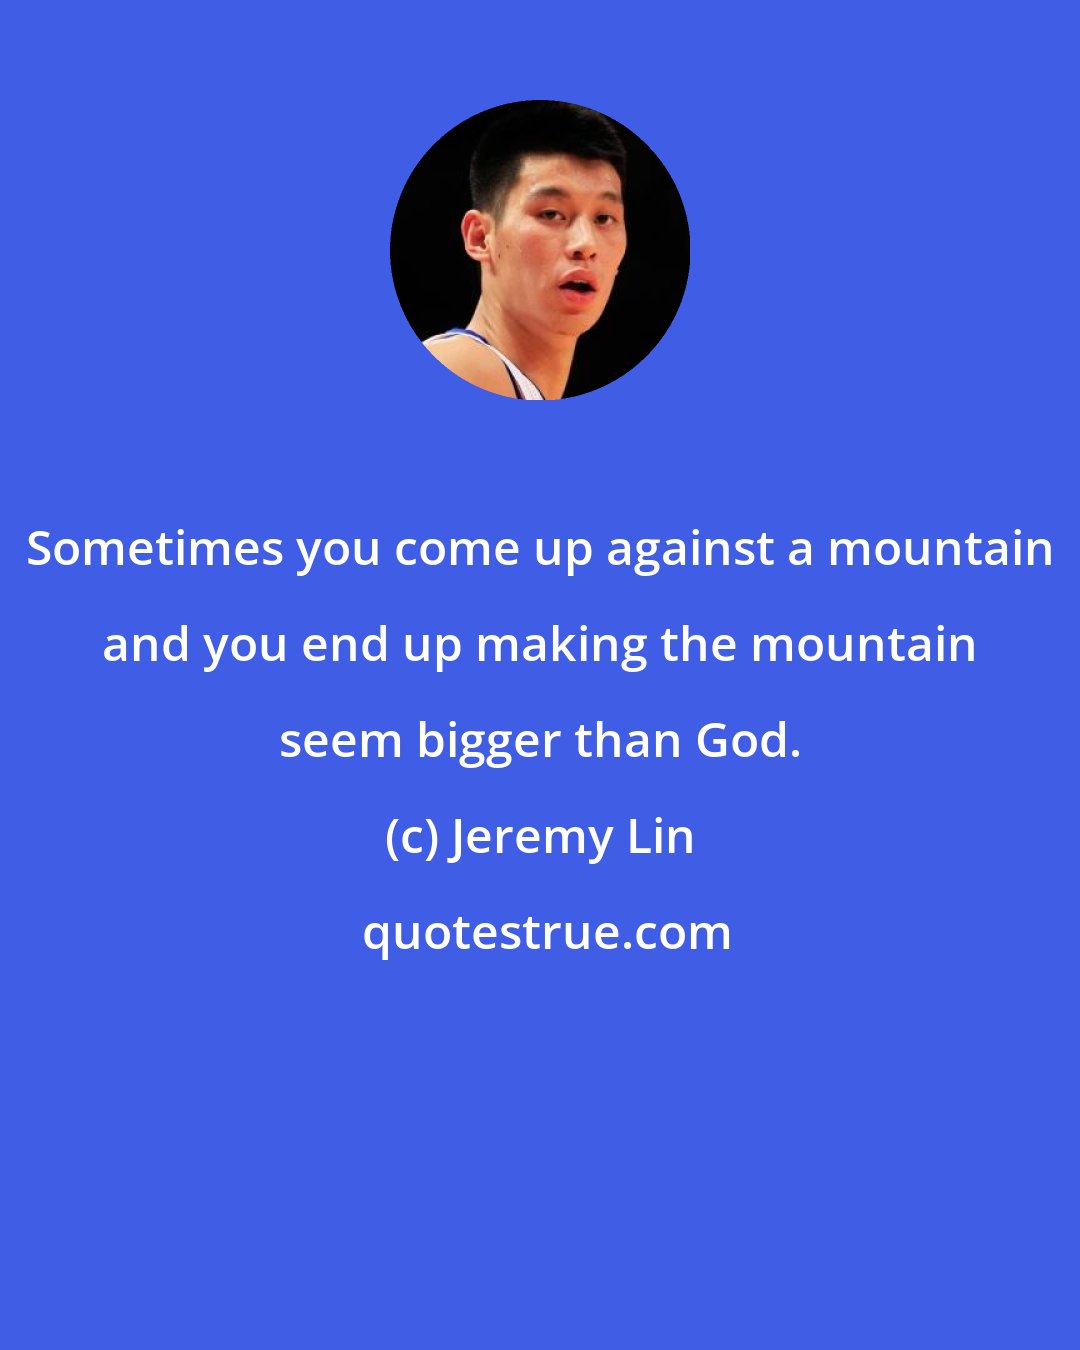 Jeremy Lin: Sometimes you come up against a mountain and you end up making the mountain seem bigger than God.